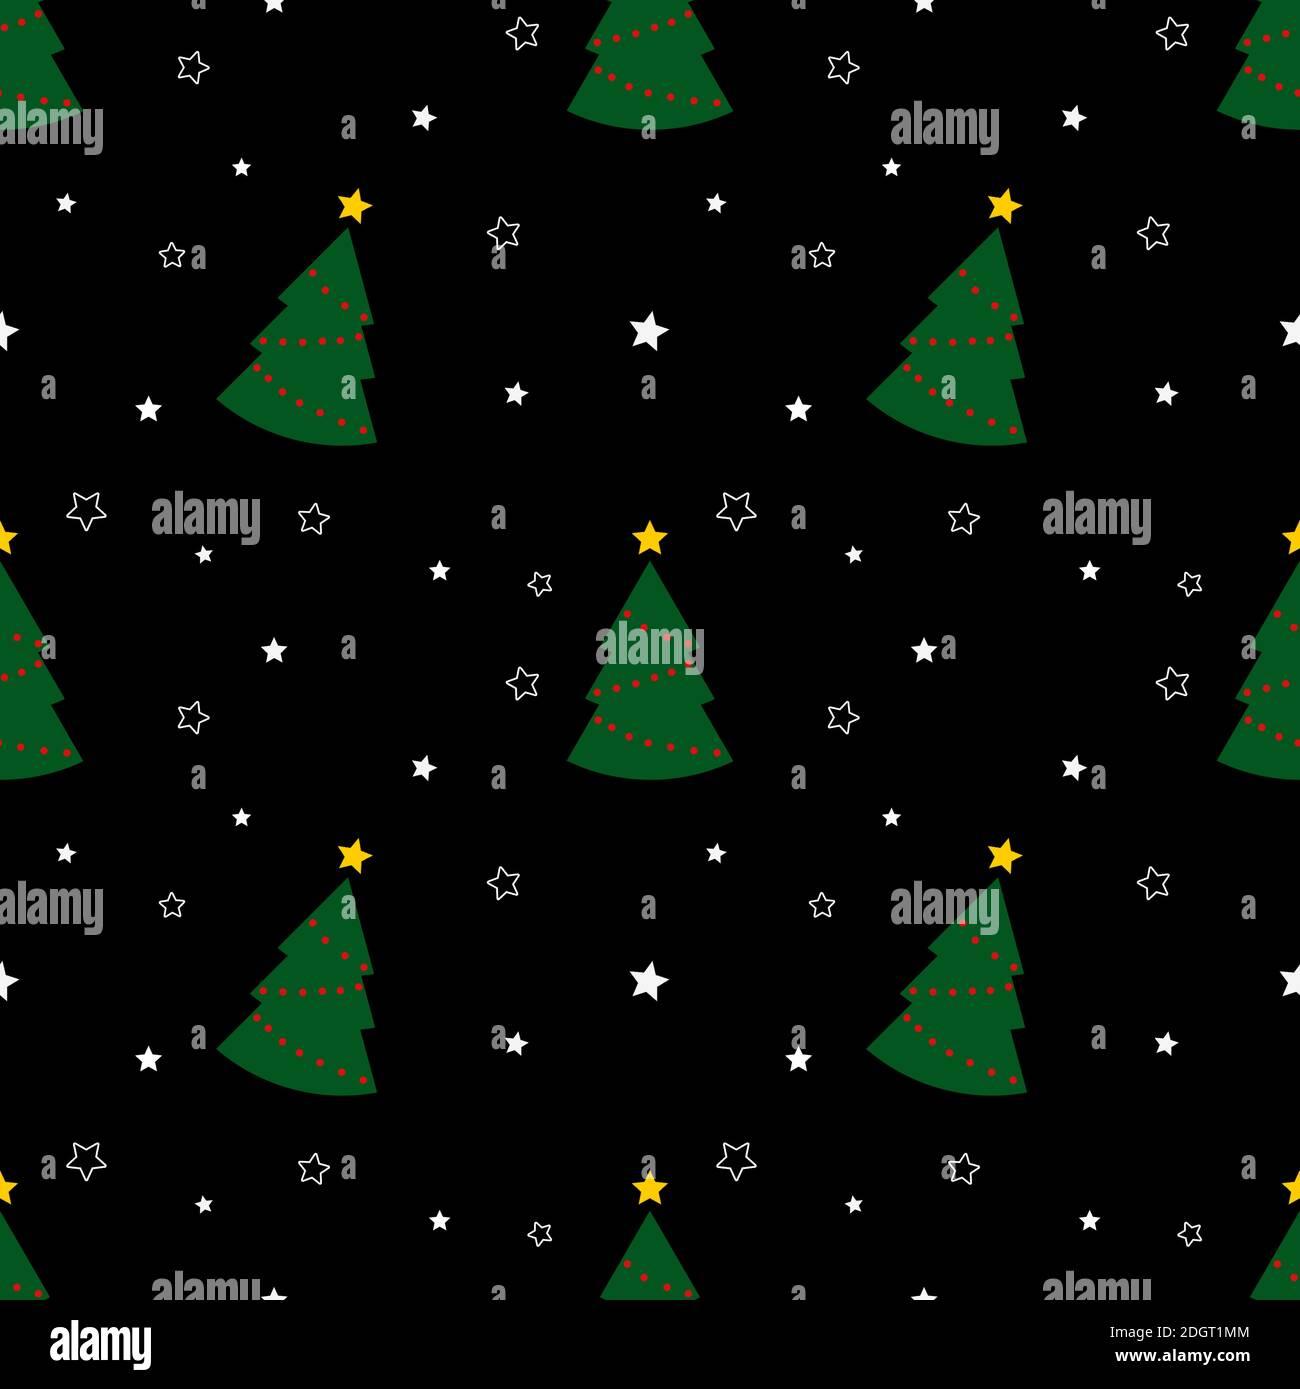 Seamless pattern with green christmas trees and stars on black